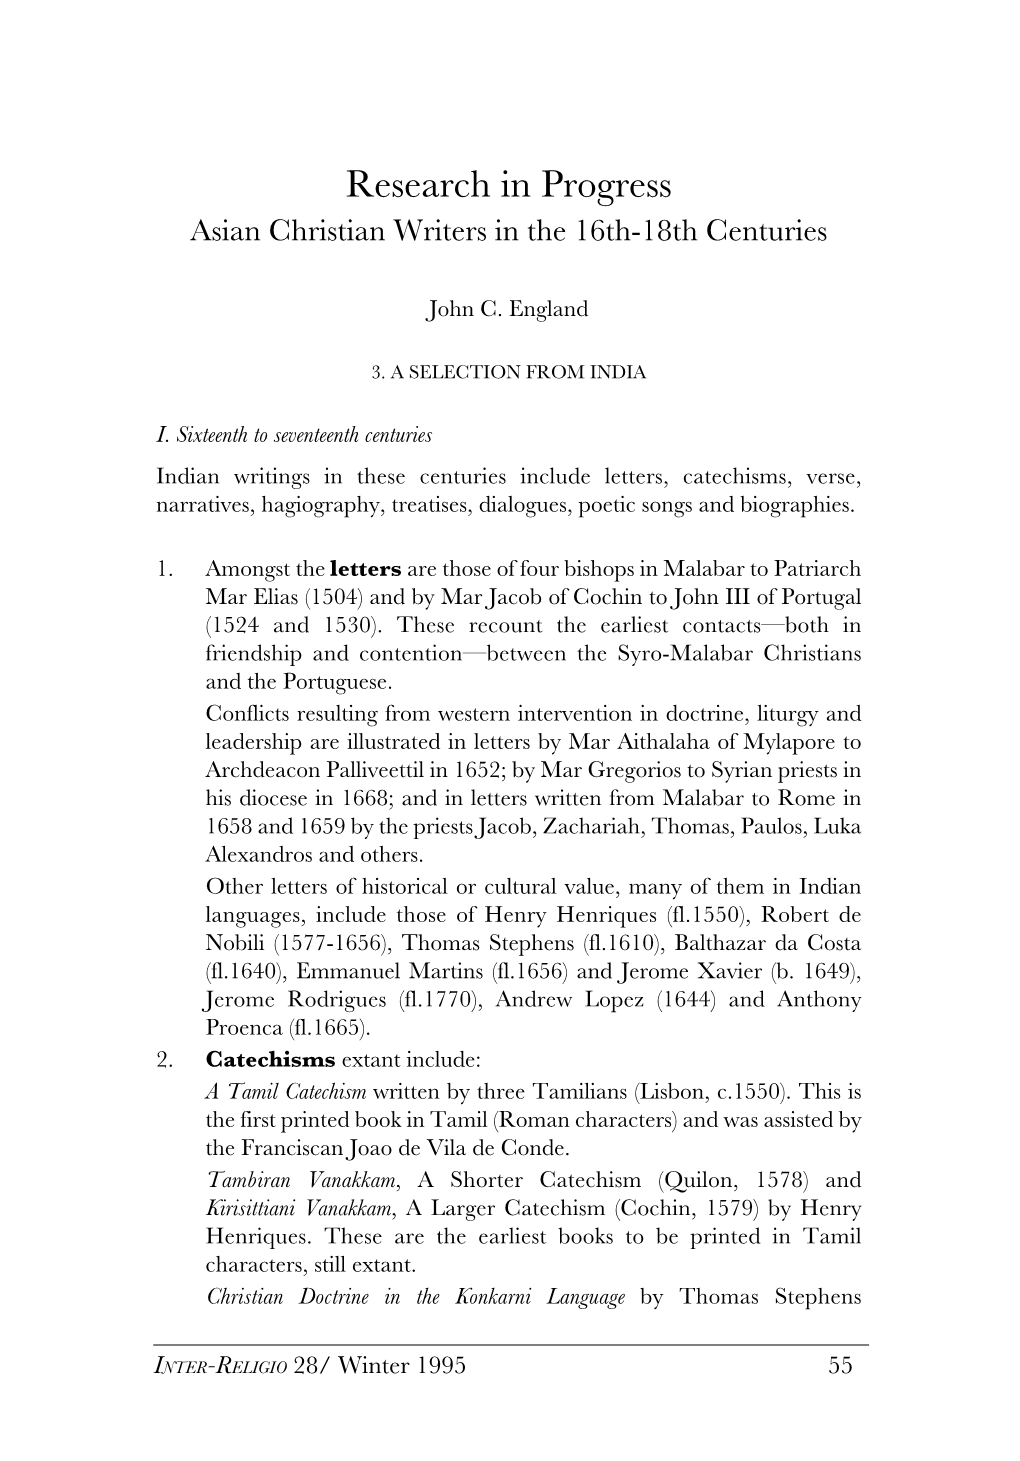 Asian Christian Writers in the 16Th-18Th Centuries